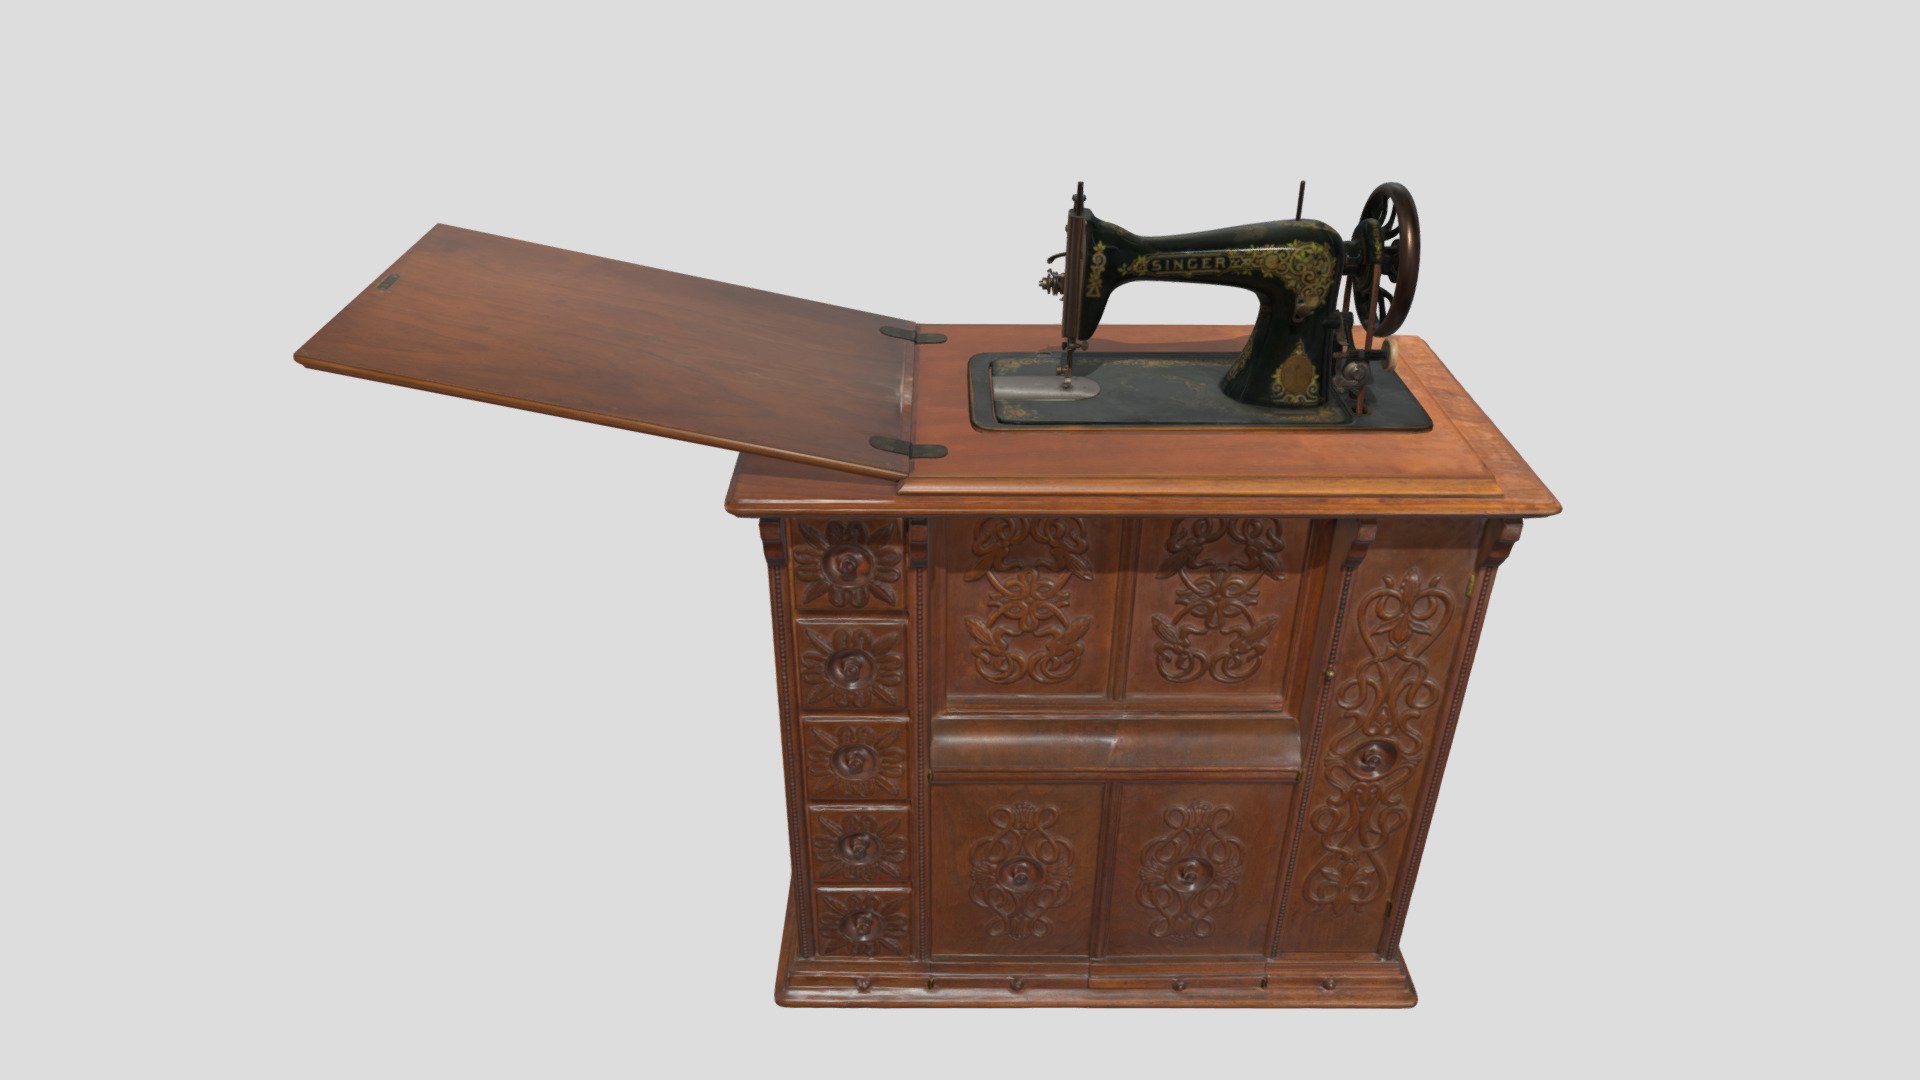 The Singer kl. 15-30 sewing machine was designed for use in homes and in small sewing workshops. The body and plinth of the machine were made of cast iron covered in black lacquer. The entire machine was richly adorned with decal patterns named Gingerbread or Tiffany. The heavy arm of the machine was placed in a model 22 wooden cabinet. The richly decorated, Victorian-style cabinet doubled as a piece of furniture when the machine was not in use. A special mechanism in the form of a button placed at the front of the machine, on the upper right door, enables the machine arm to be retracted or pulled out. The housing has five drawers which could be locked with a key from the inside. The front and side panels are designed so that they can be opened, which facilitated access to the pedal mechanism. 

Manufacturer: The Singer Manufacturing Company, 1908-1910, Wittenberg, Germany

Inv. No.: MIM999/IX-60

Model prepared on the basis of photogrammetric measurements

Licence: CC BY-NC-SA - Singer, kl. 15-30 sewing machine - Download Free 3D model by Museum of Engineering and Technology, Krakow (@mitkrakow) 3d model